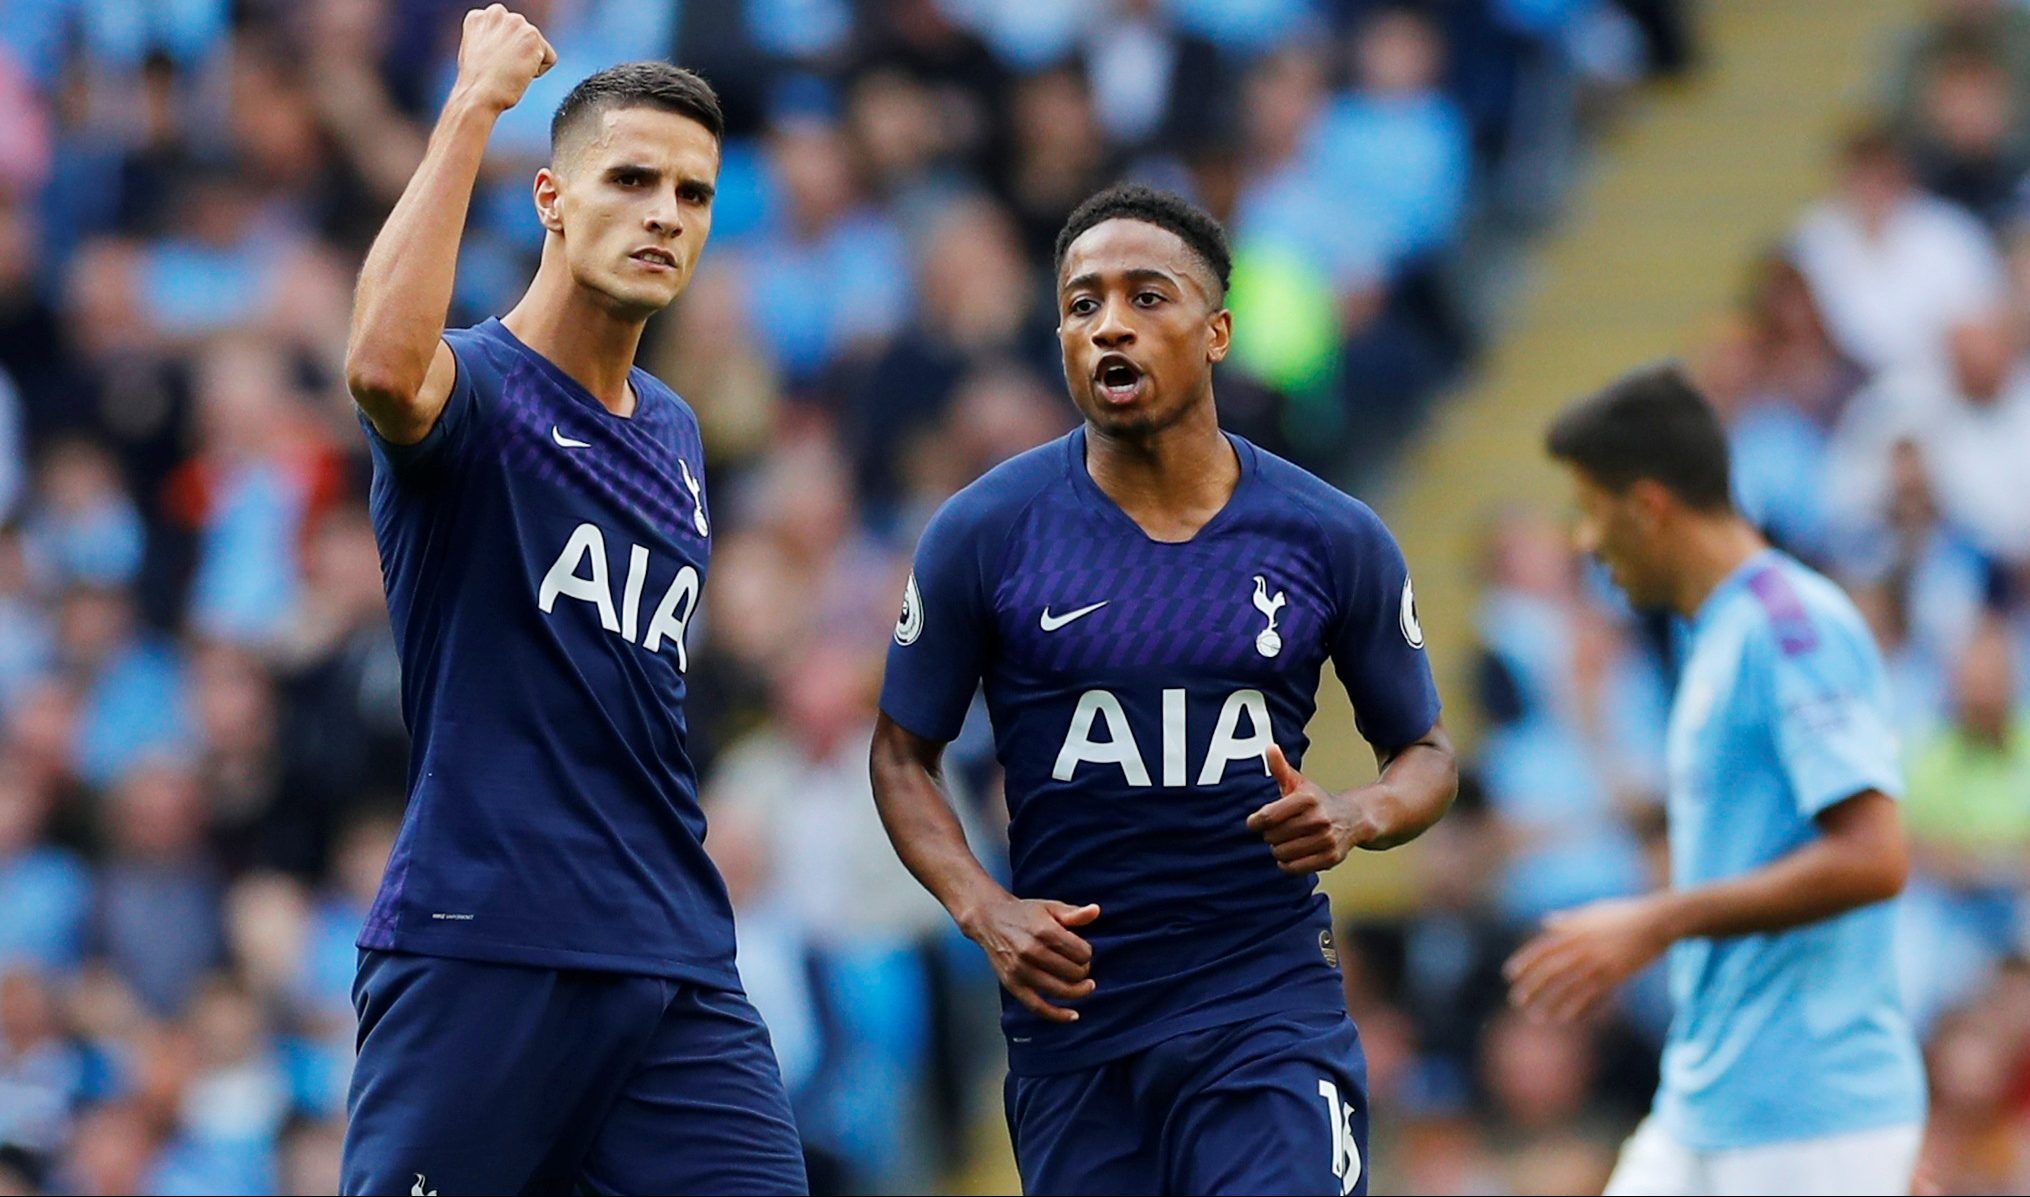 Soccer Football - Premier League - Manchester City v Tottenham Hotspur - Etihad Stadium, Manchester, Britain - August 17, 2019  Tottenham Hotspur's Erik Lamela celebrates scoring their first goal with Kyle Walker-Peters   REUTERS/Phil Noble  EDITORIAL USE ONLY. No use with unauthorized audio, video, data, fixture lists, club/league logos or 